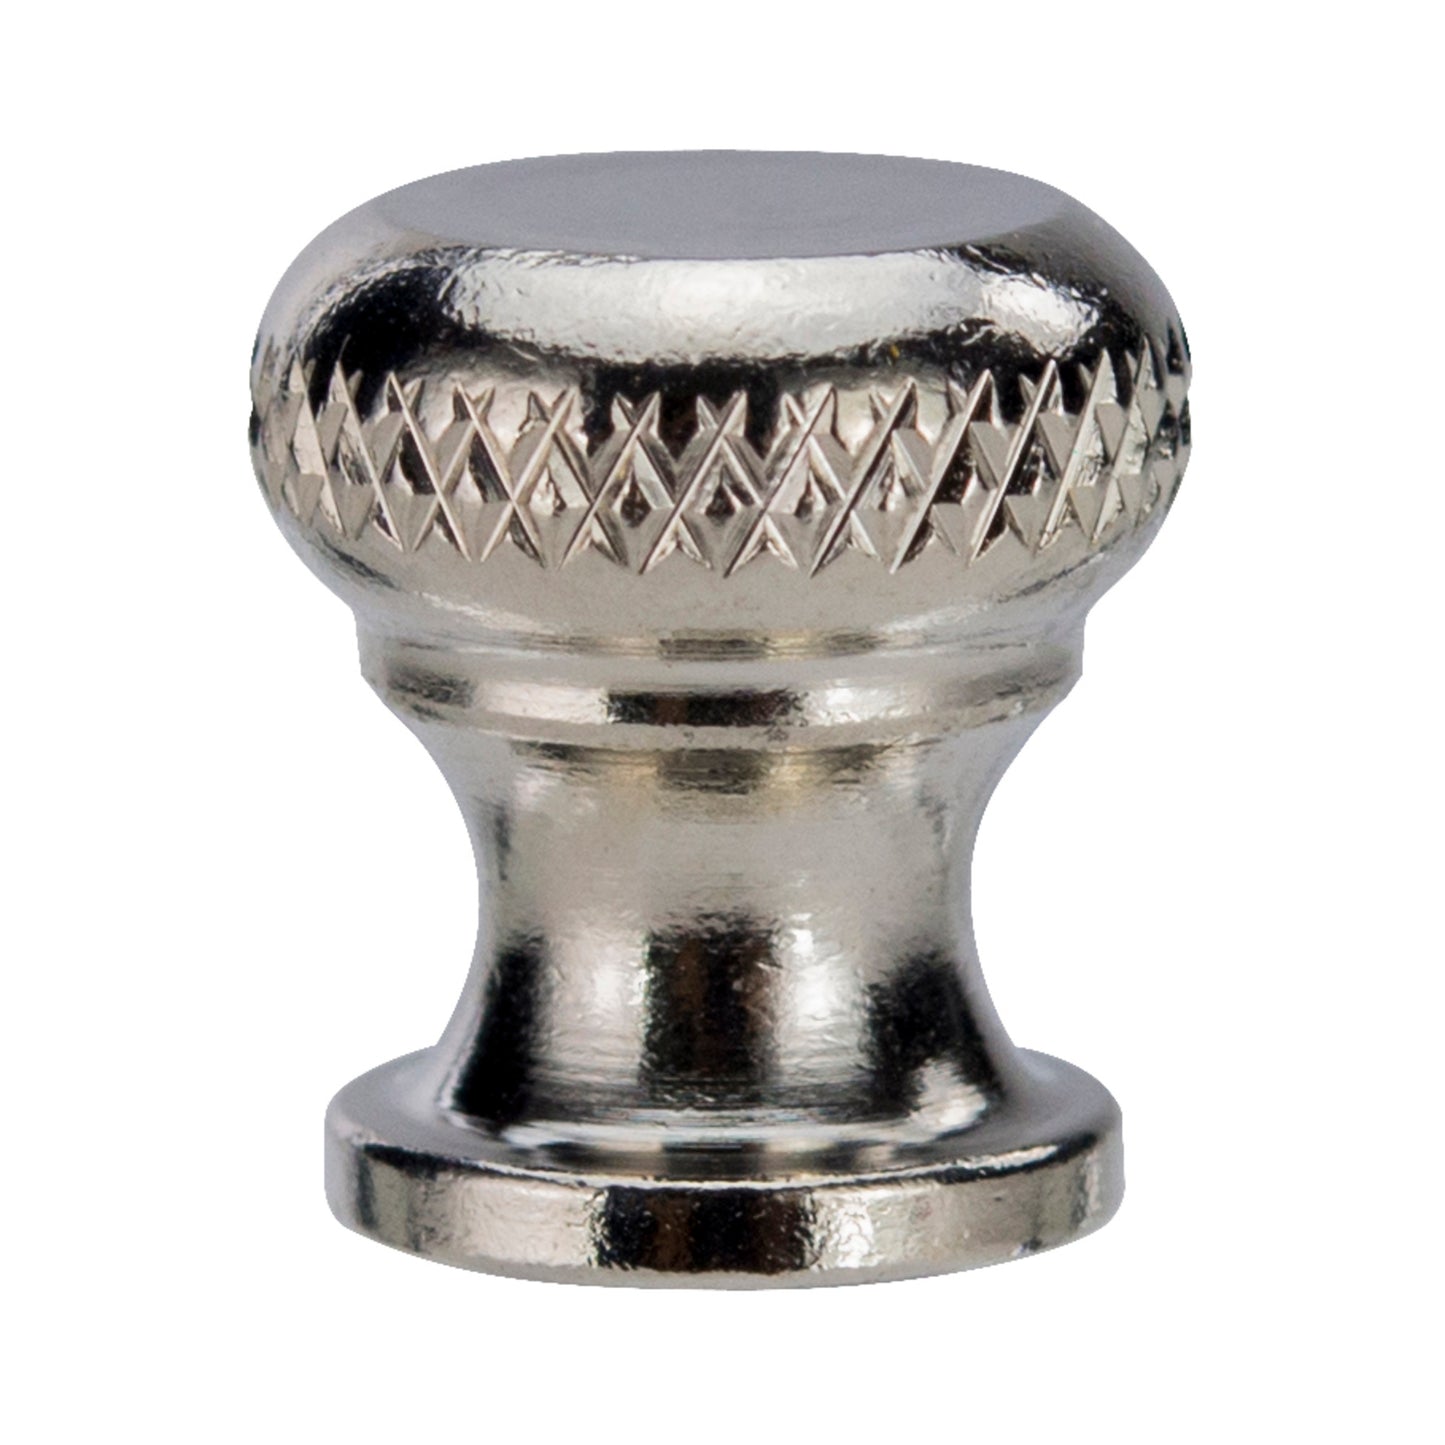 WPM-6K - Replacement Knob for 6" Pepper Mills